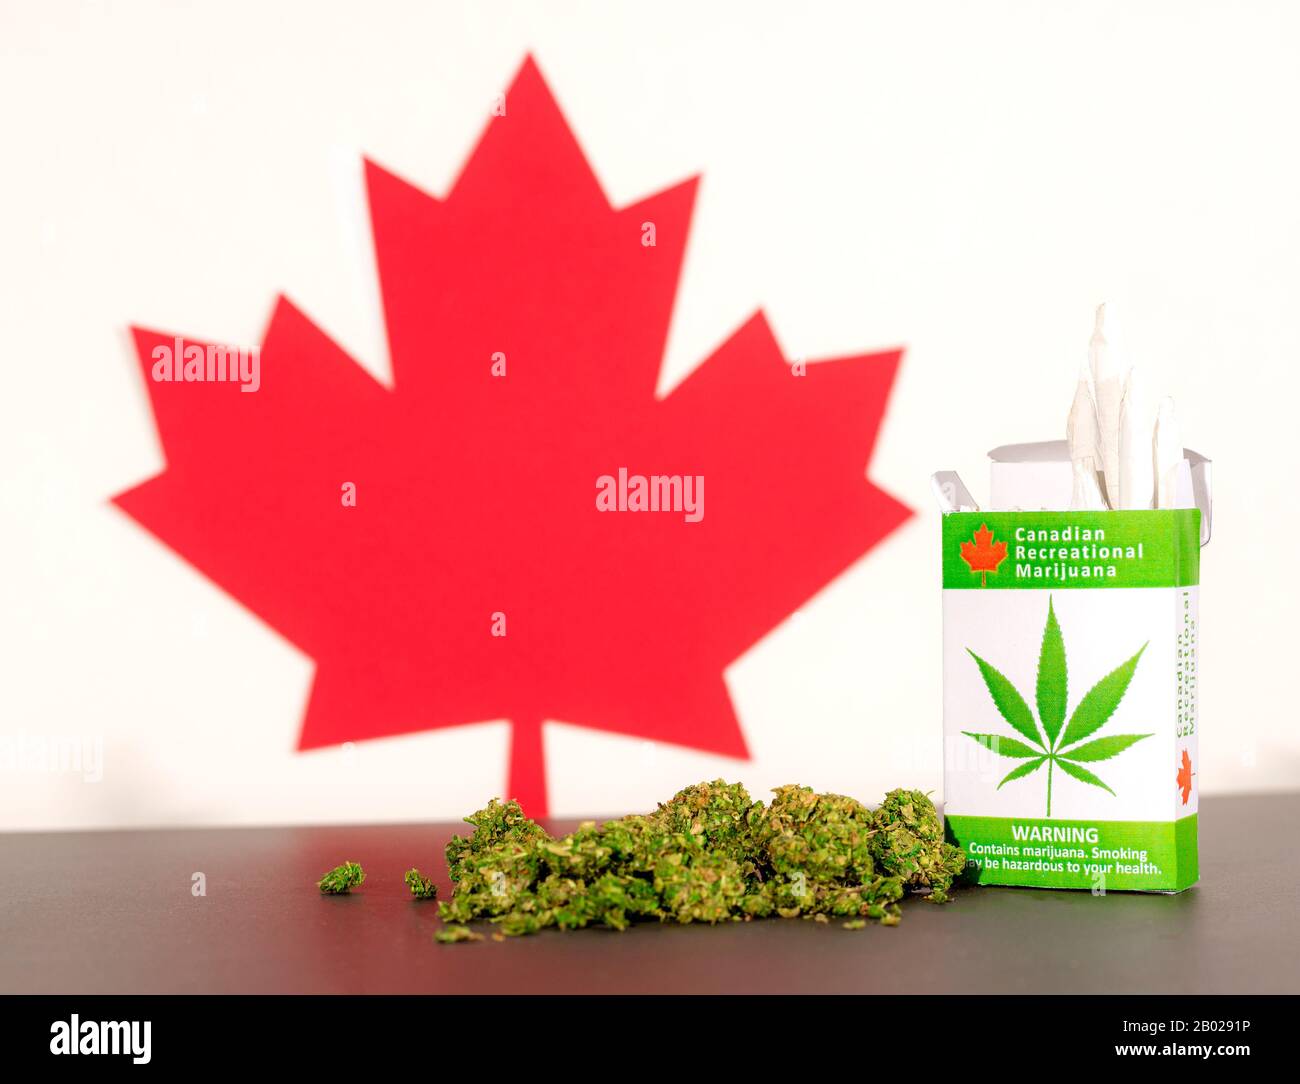 Cannabis in Canada. A package of cannabis cigarettes on a table, with a Canadian maple leaf behind. Marijuana buds on the table. Stock Photo